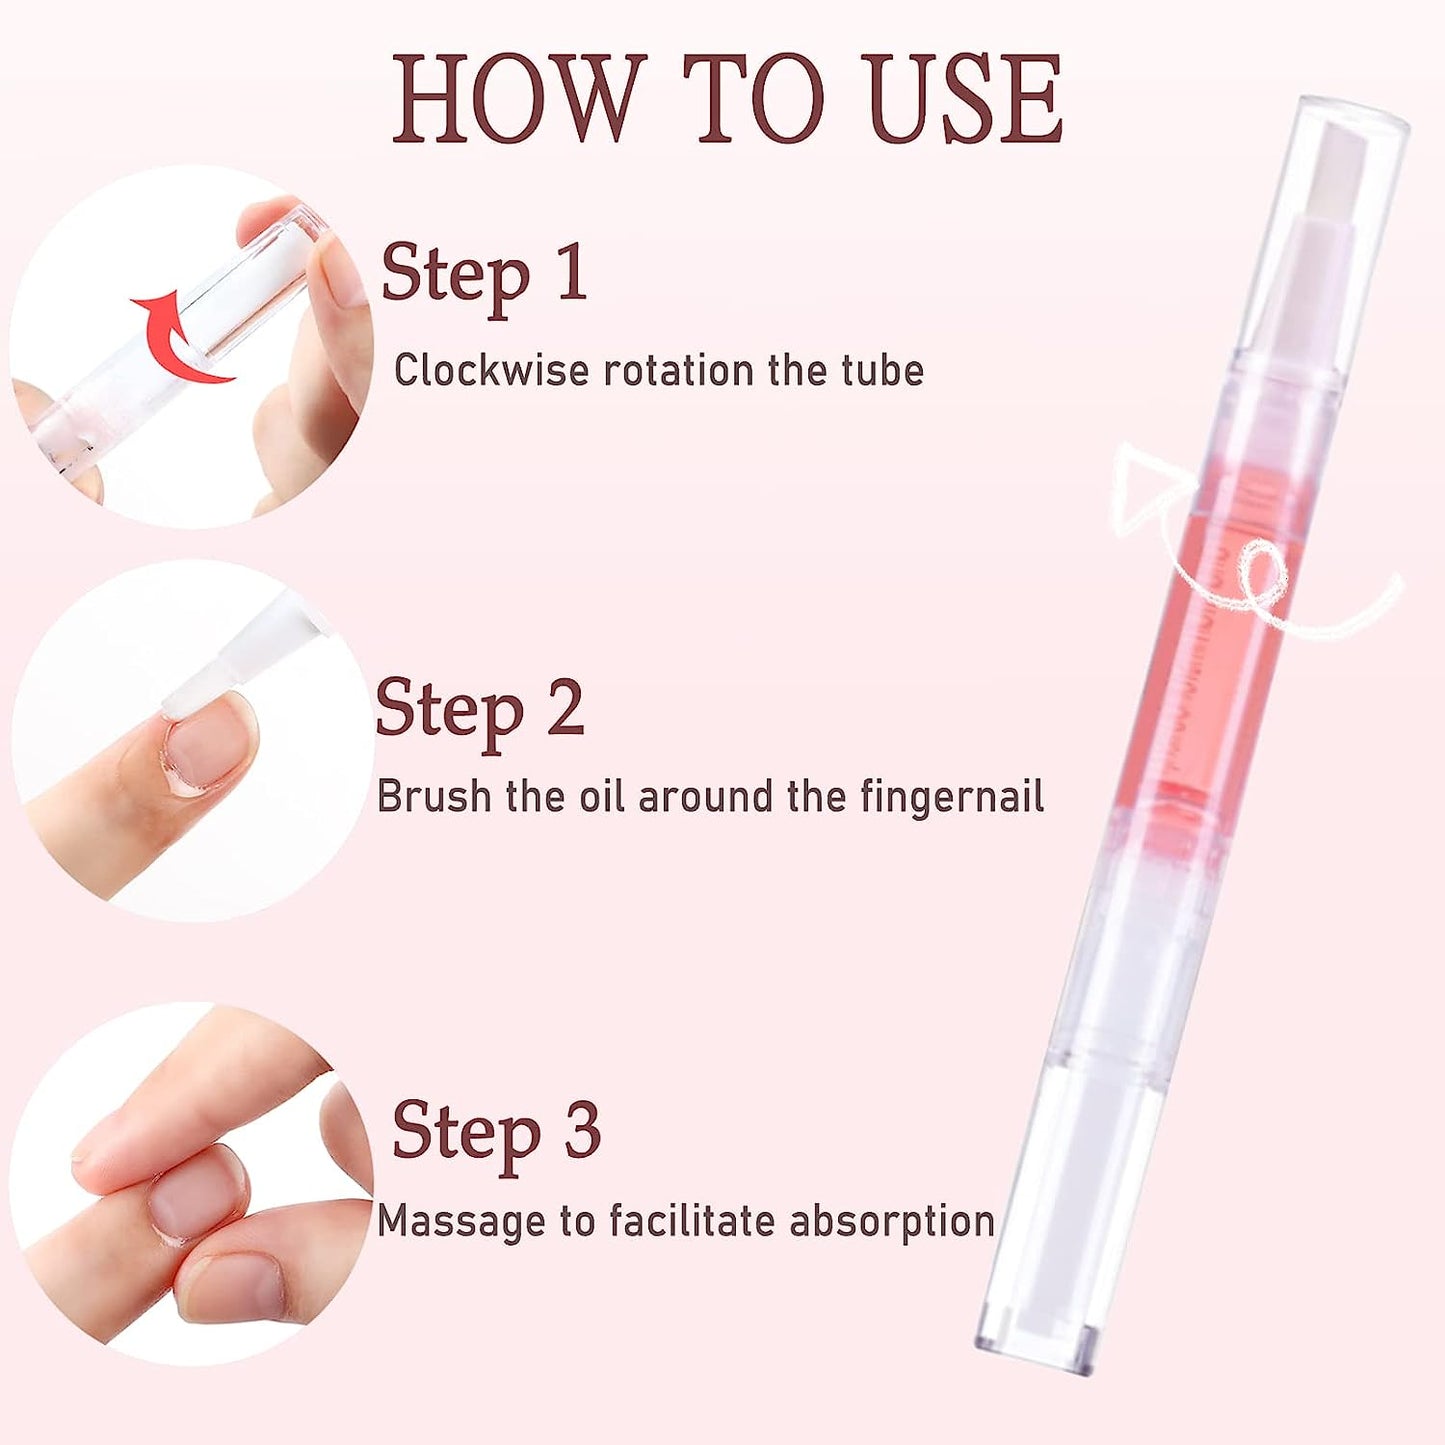 Gleevia Cuticle Oil Pen for Nail Care, 1PCS Cuticle Oil Nail Nutrition Oil With Natural Ingredients Revitalize Pen for Nail Growth Moisturizing